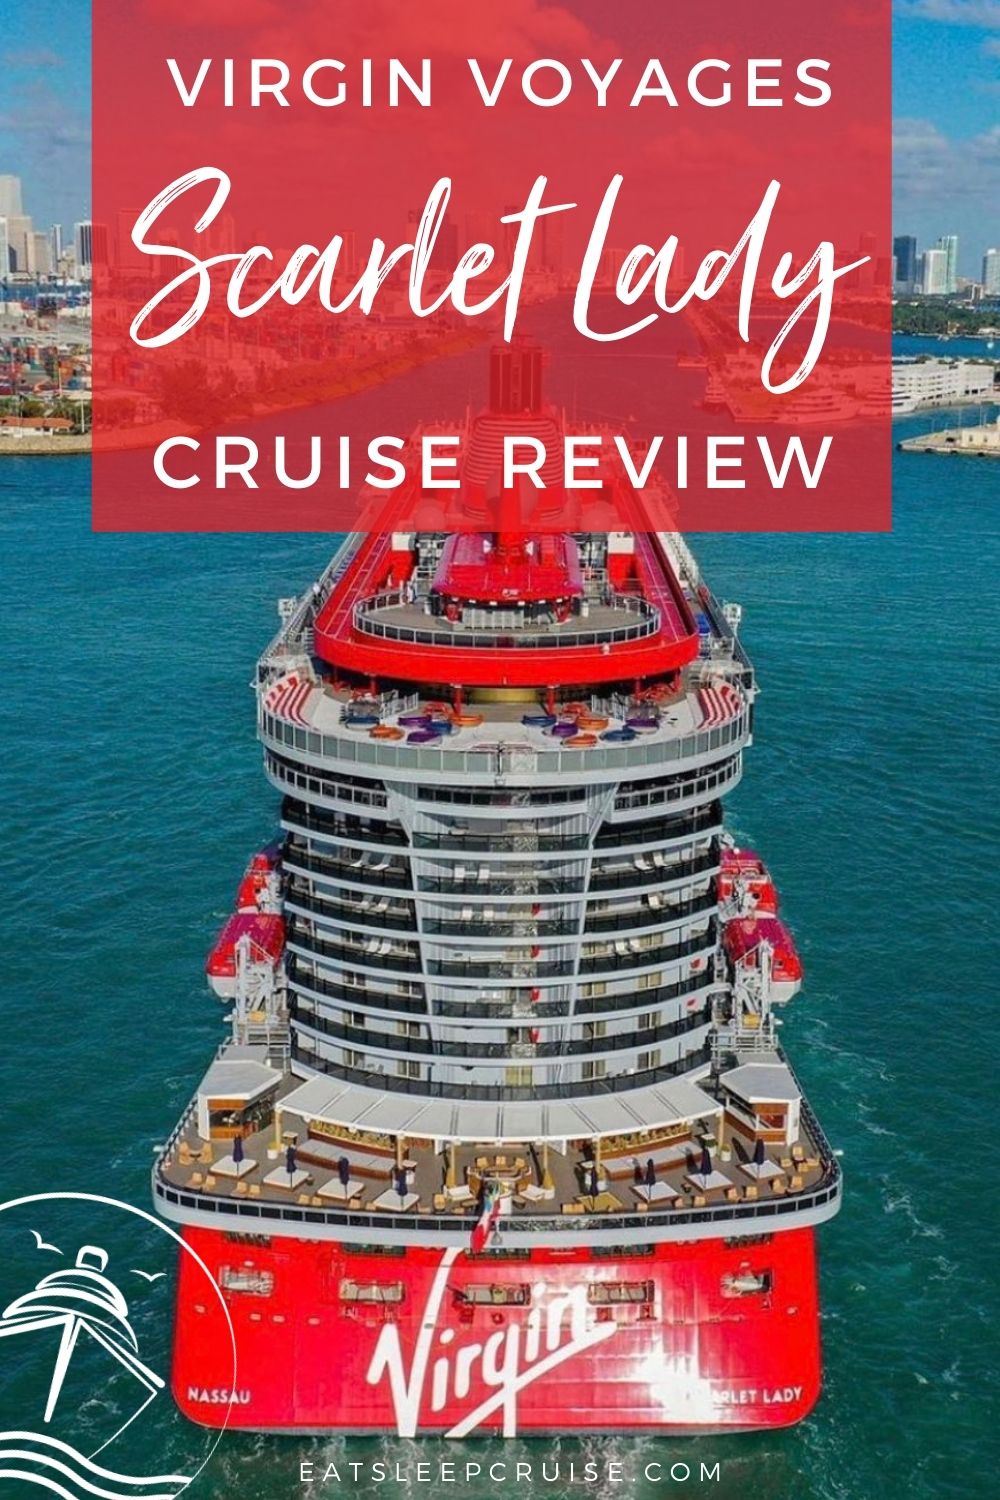 Virgin Voyages Scarlet Lady Mayan Sol Cruise Review